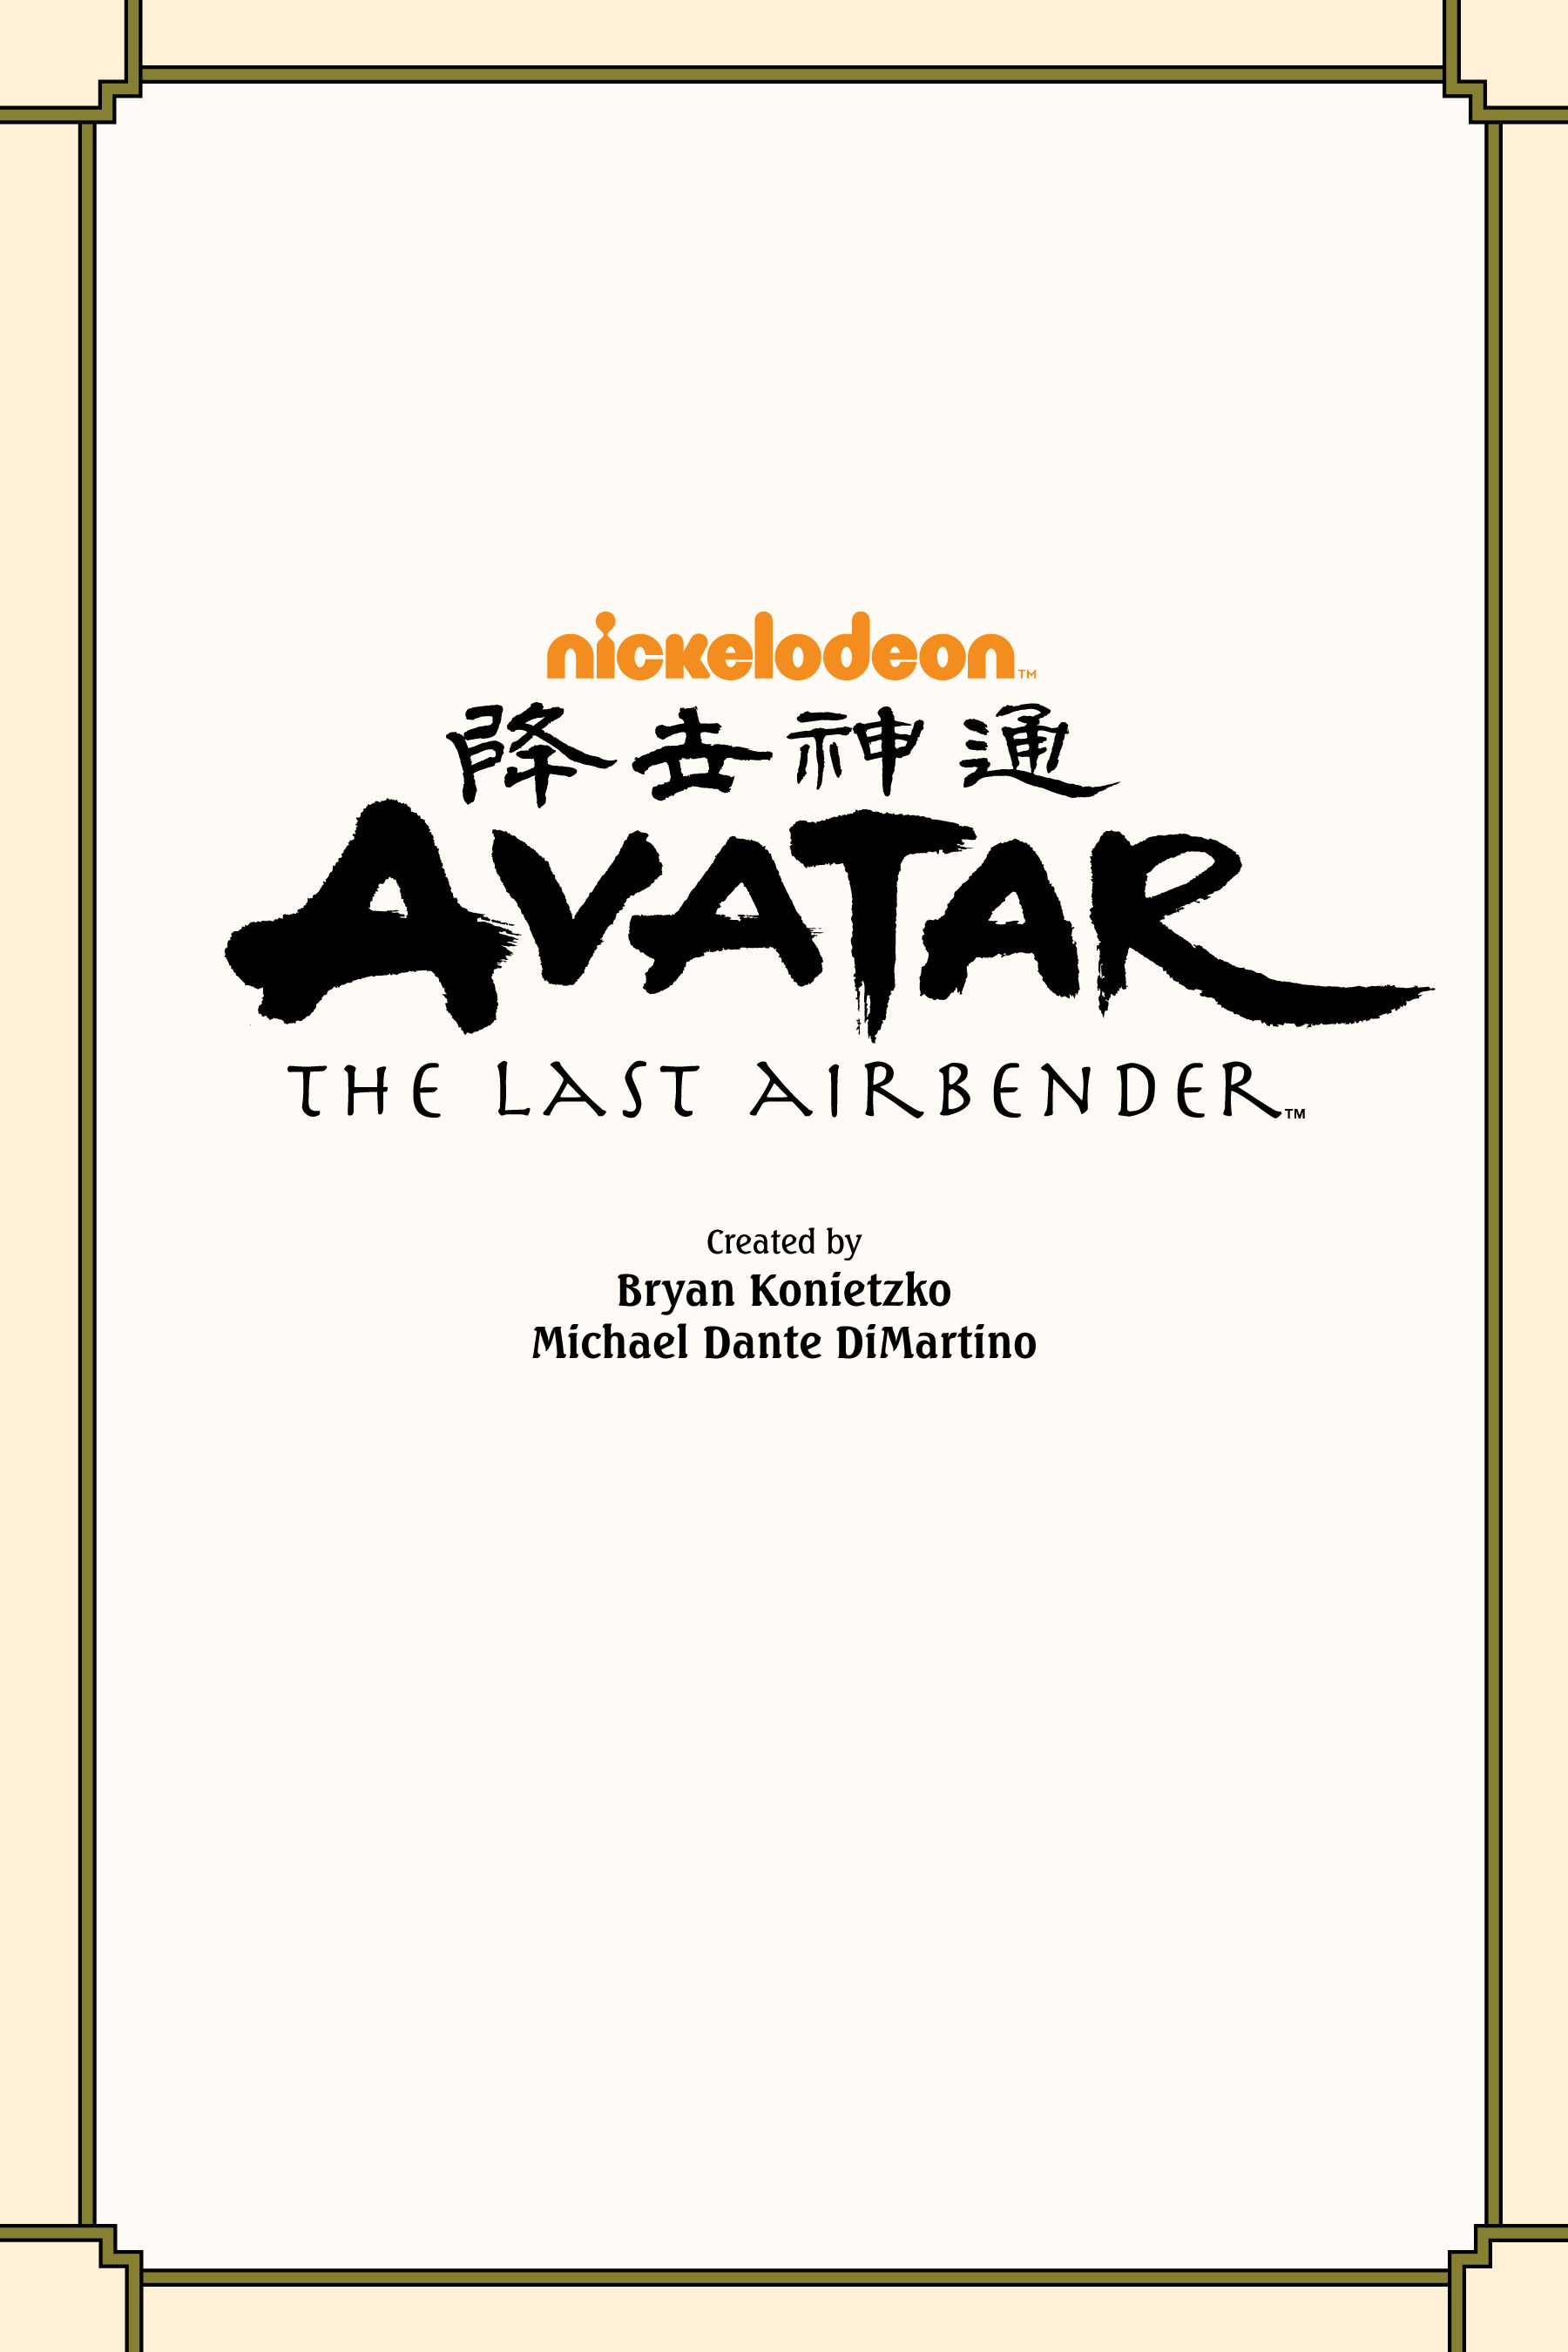 Read online Nickelodeon Avatar: The Last Airbender - Smoke and Shadow comic -  Issue # Part 1 - 3